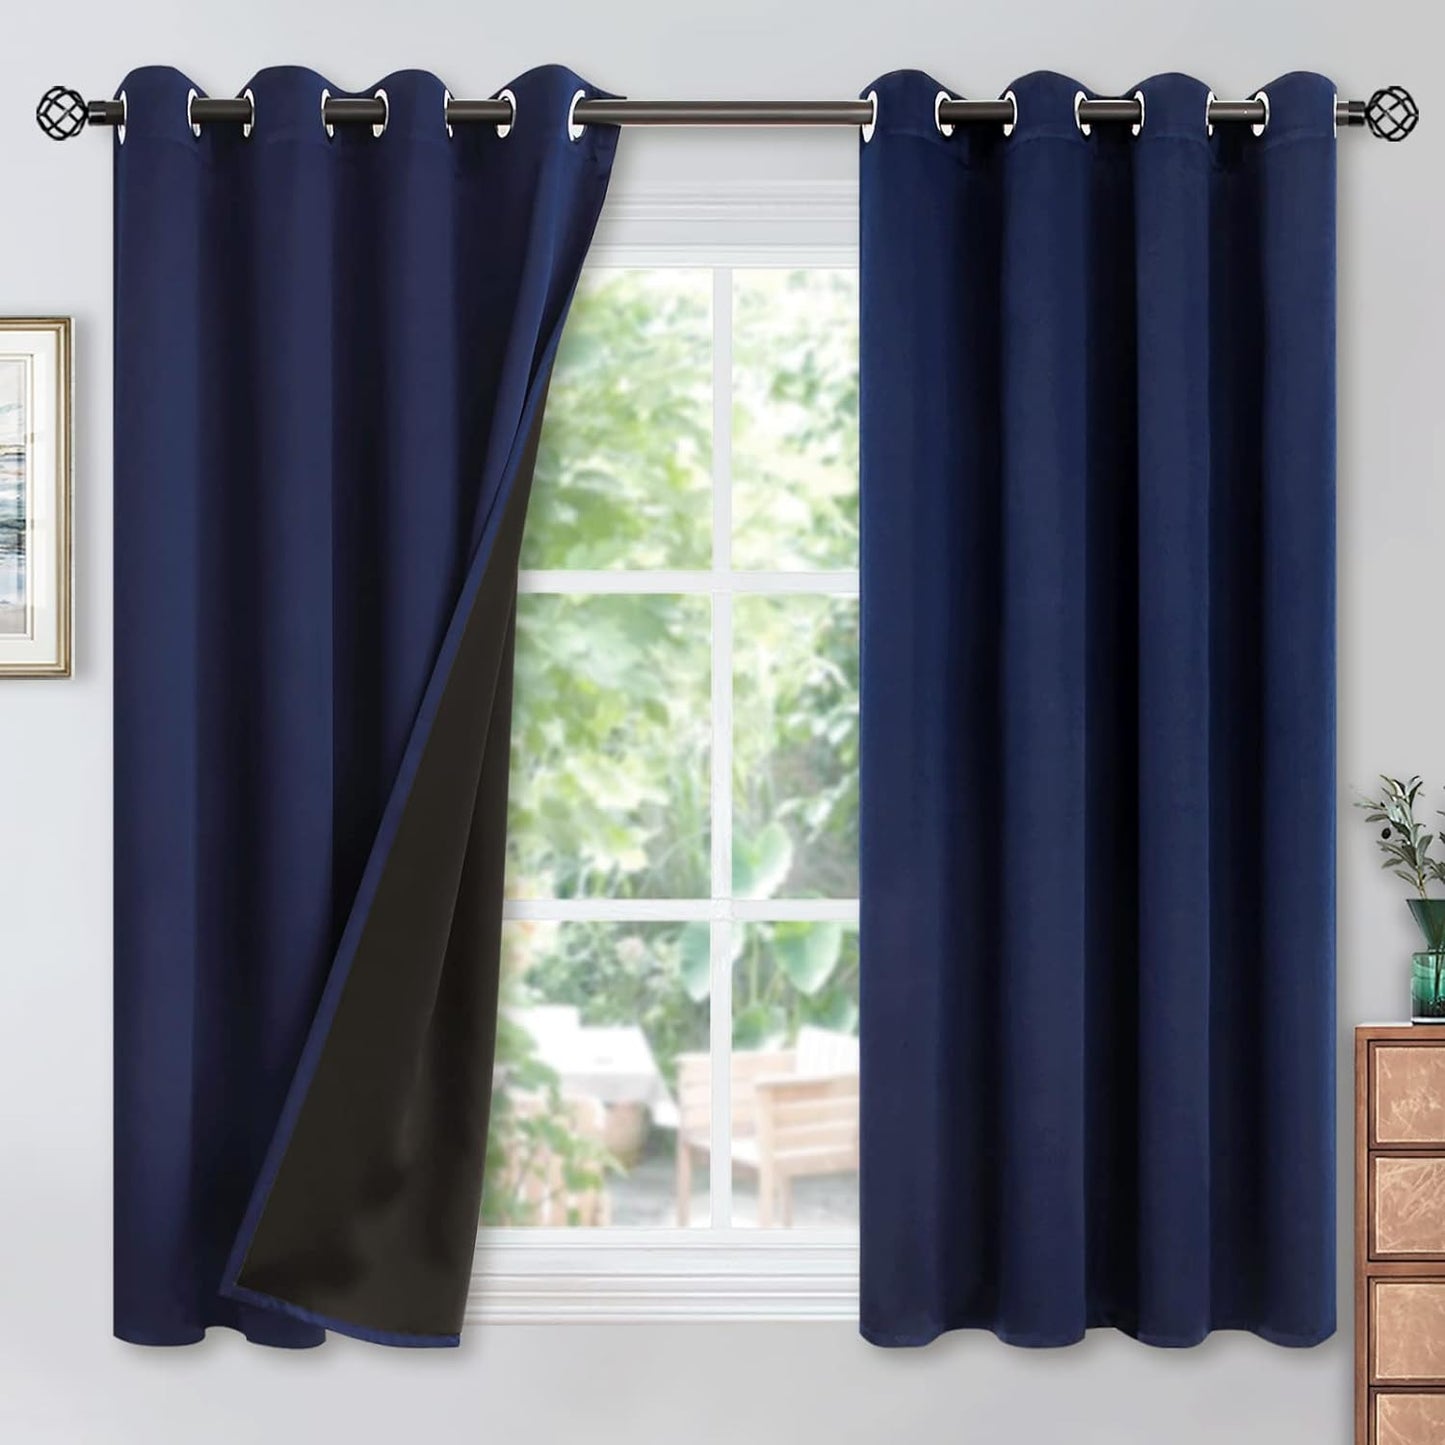 Youngstex Black 100% Blackout Curtains 63 Inches for Bedroom Thermal Insulated Total Room Darkening Curtains for Living Room Window with Black Back Grommet, 2 Panels, 42 X 63 Inch  YoungsTex Navy 52W X 54L 